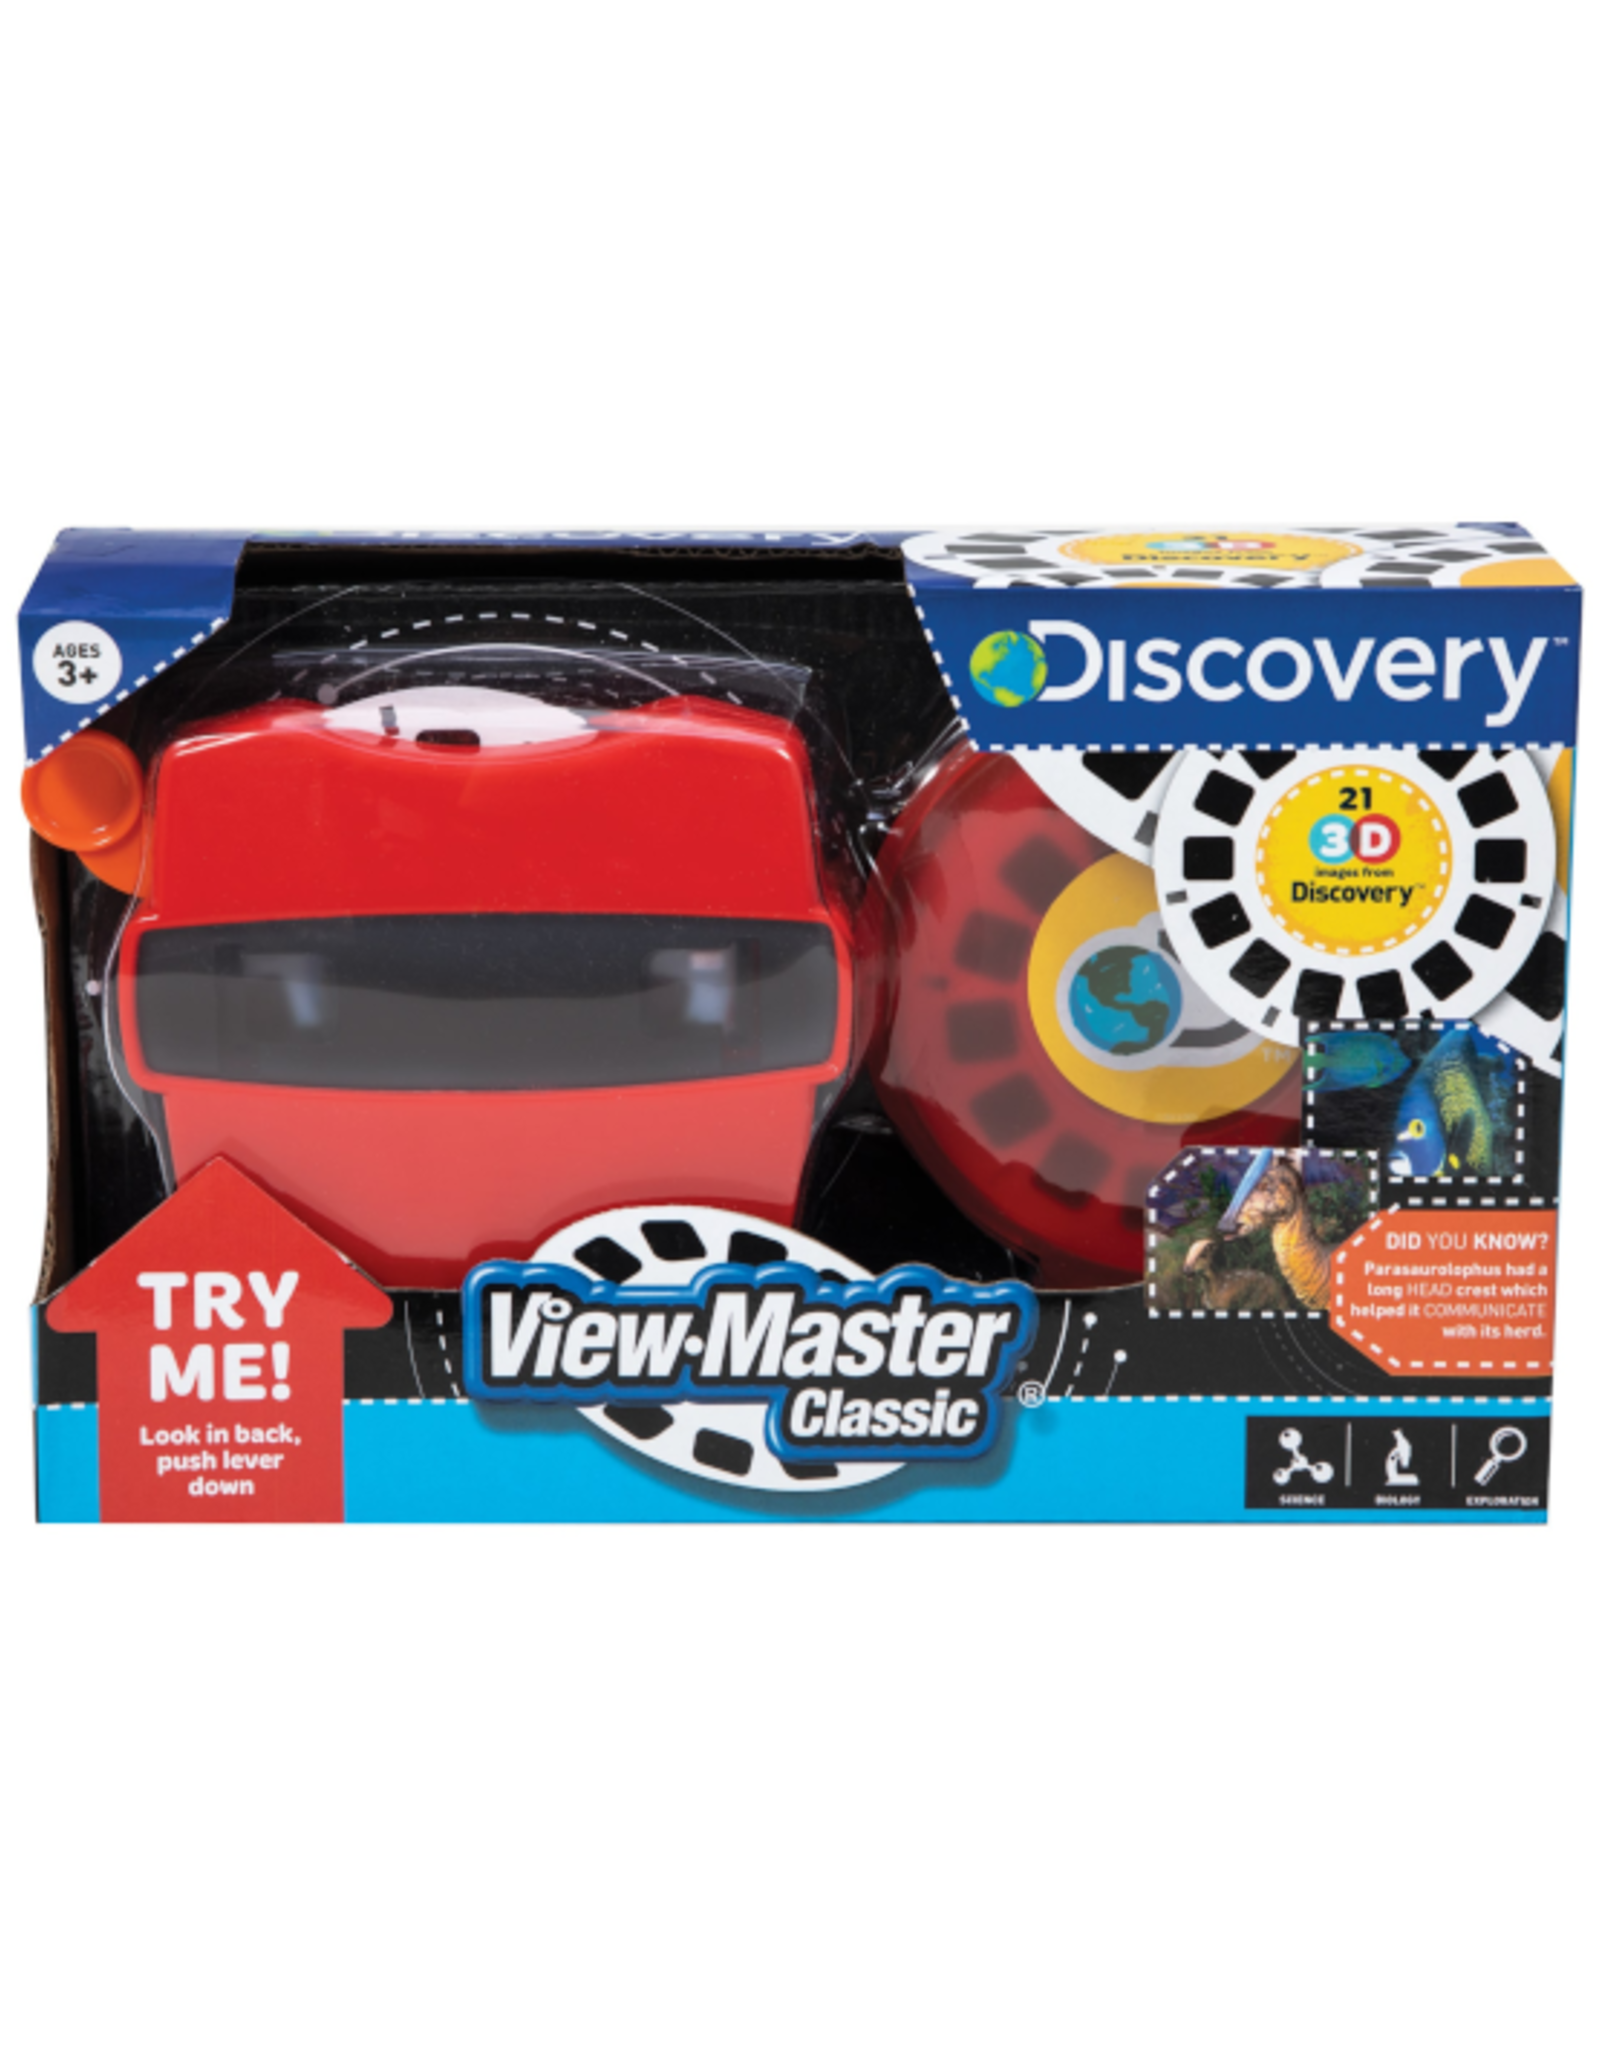 VIEW-MASTER BOXED SET - THE TOY STORE